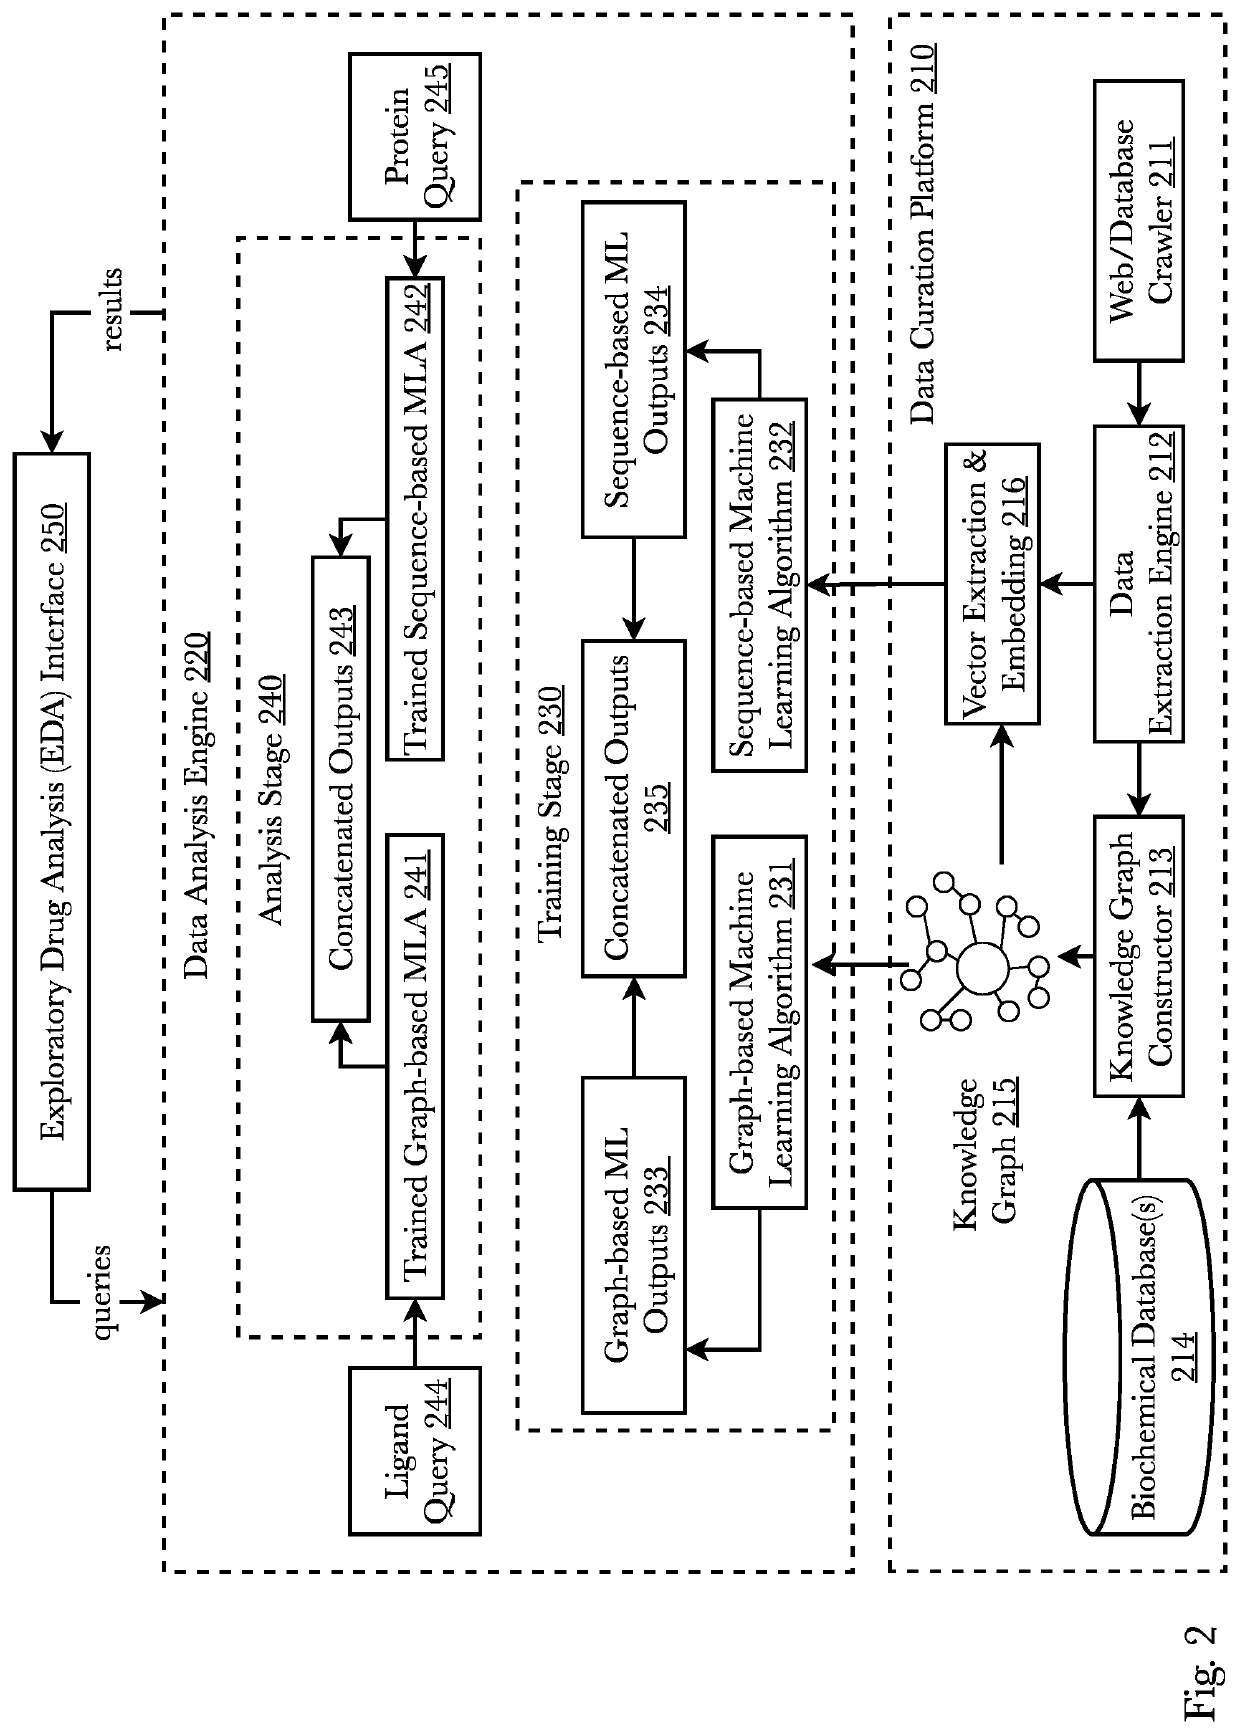 System and method for molecular reconstruction from molecular probability distributions